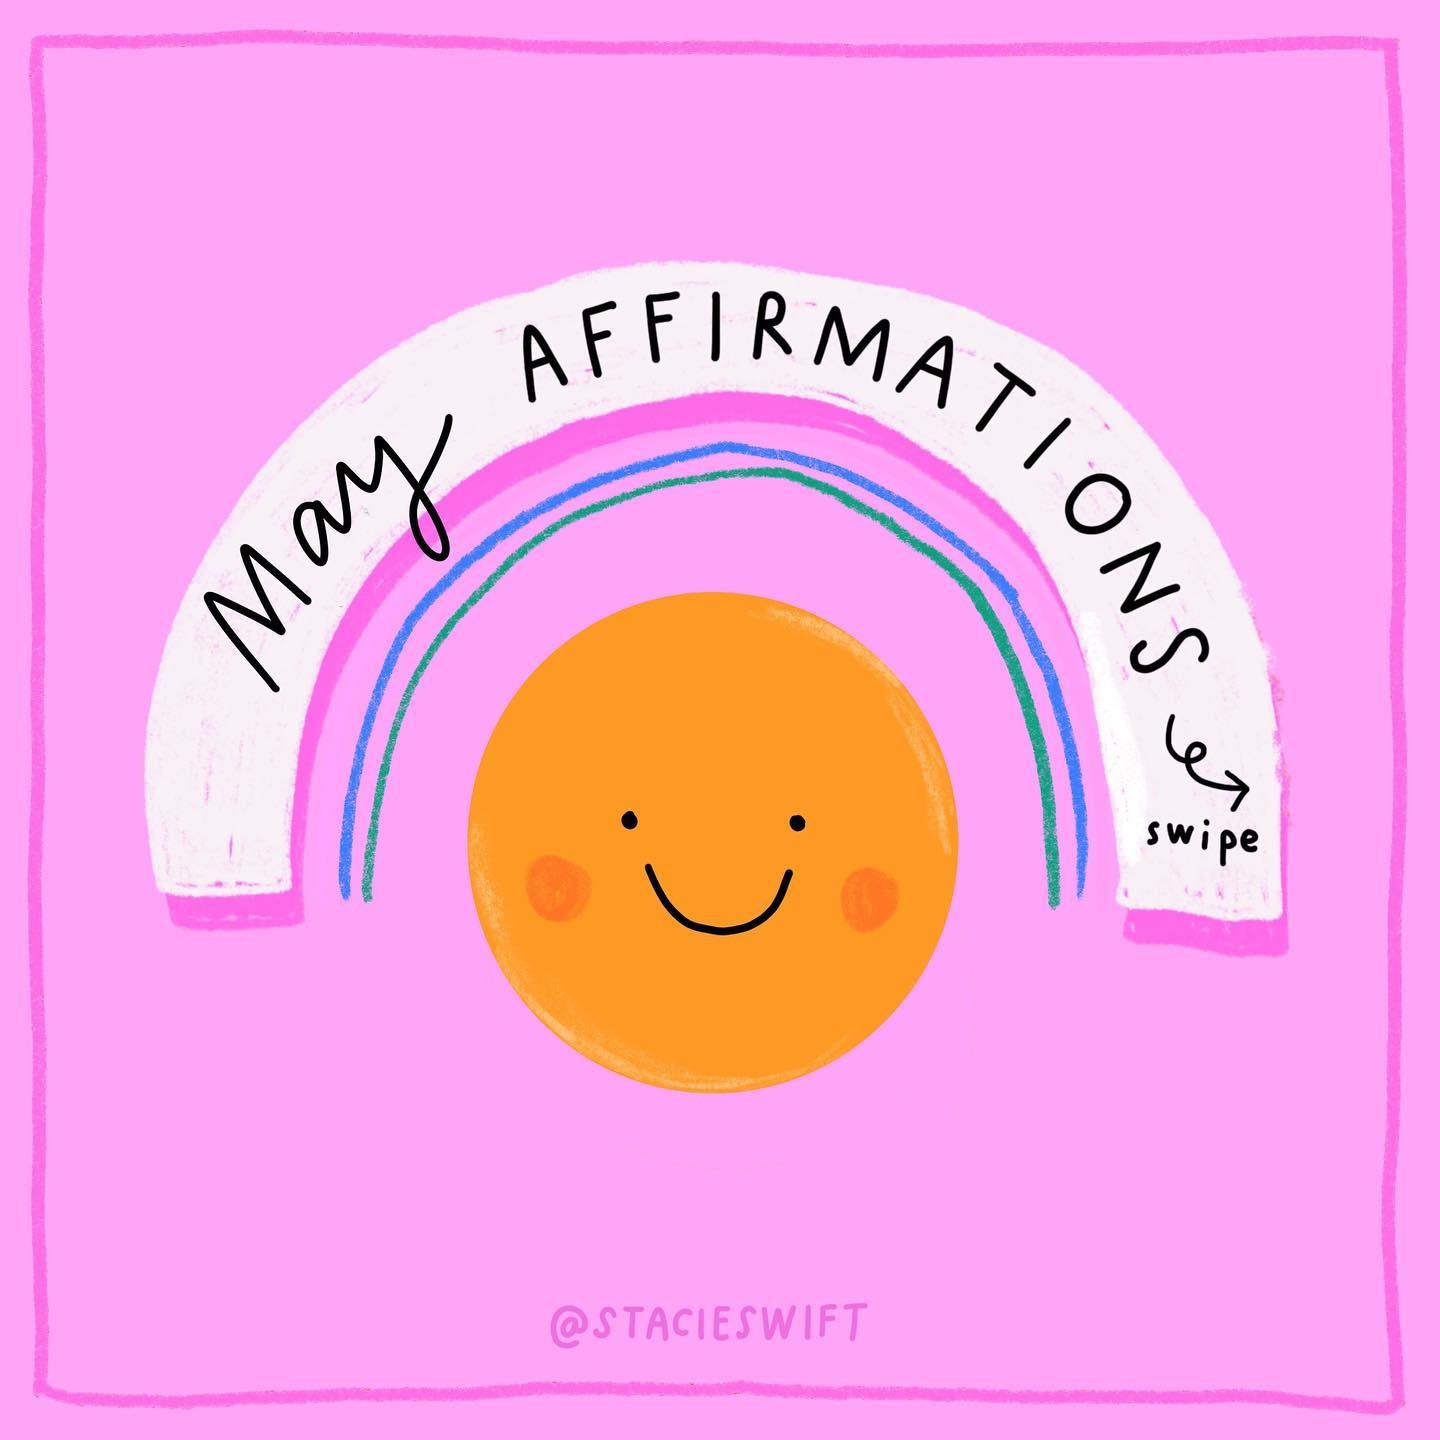 Happy May!

Some new affirmations for this month.

Things feel a little bit brighter already, don&rsquo;t you think?

💖

Save these for when you need a self-care boost or share with someone who might need some extra positivity.